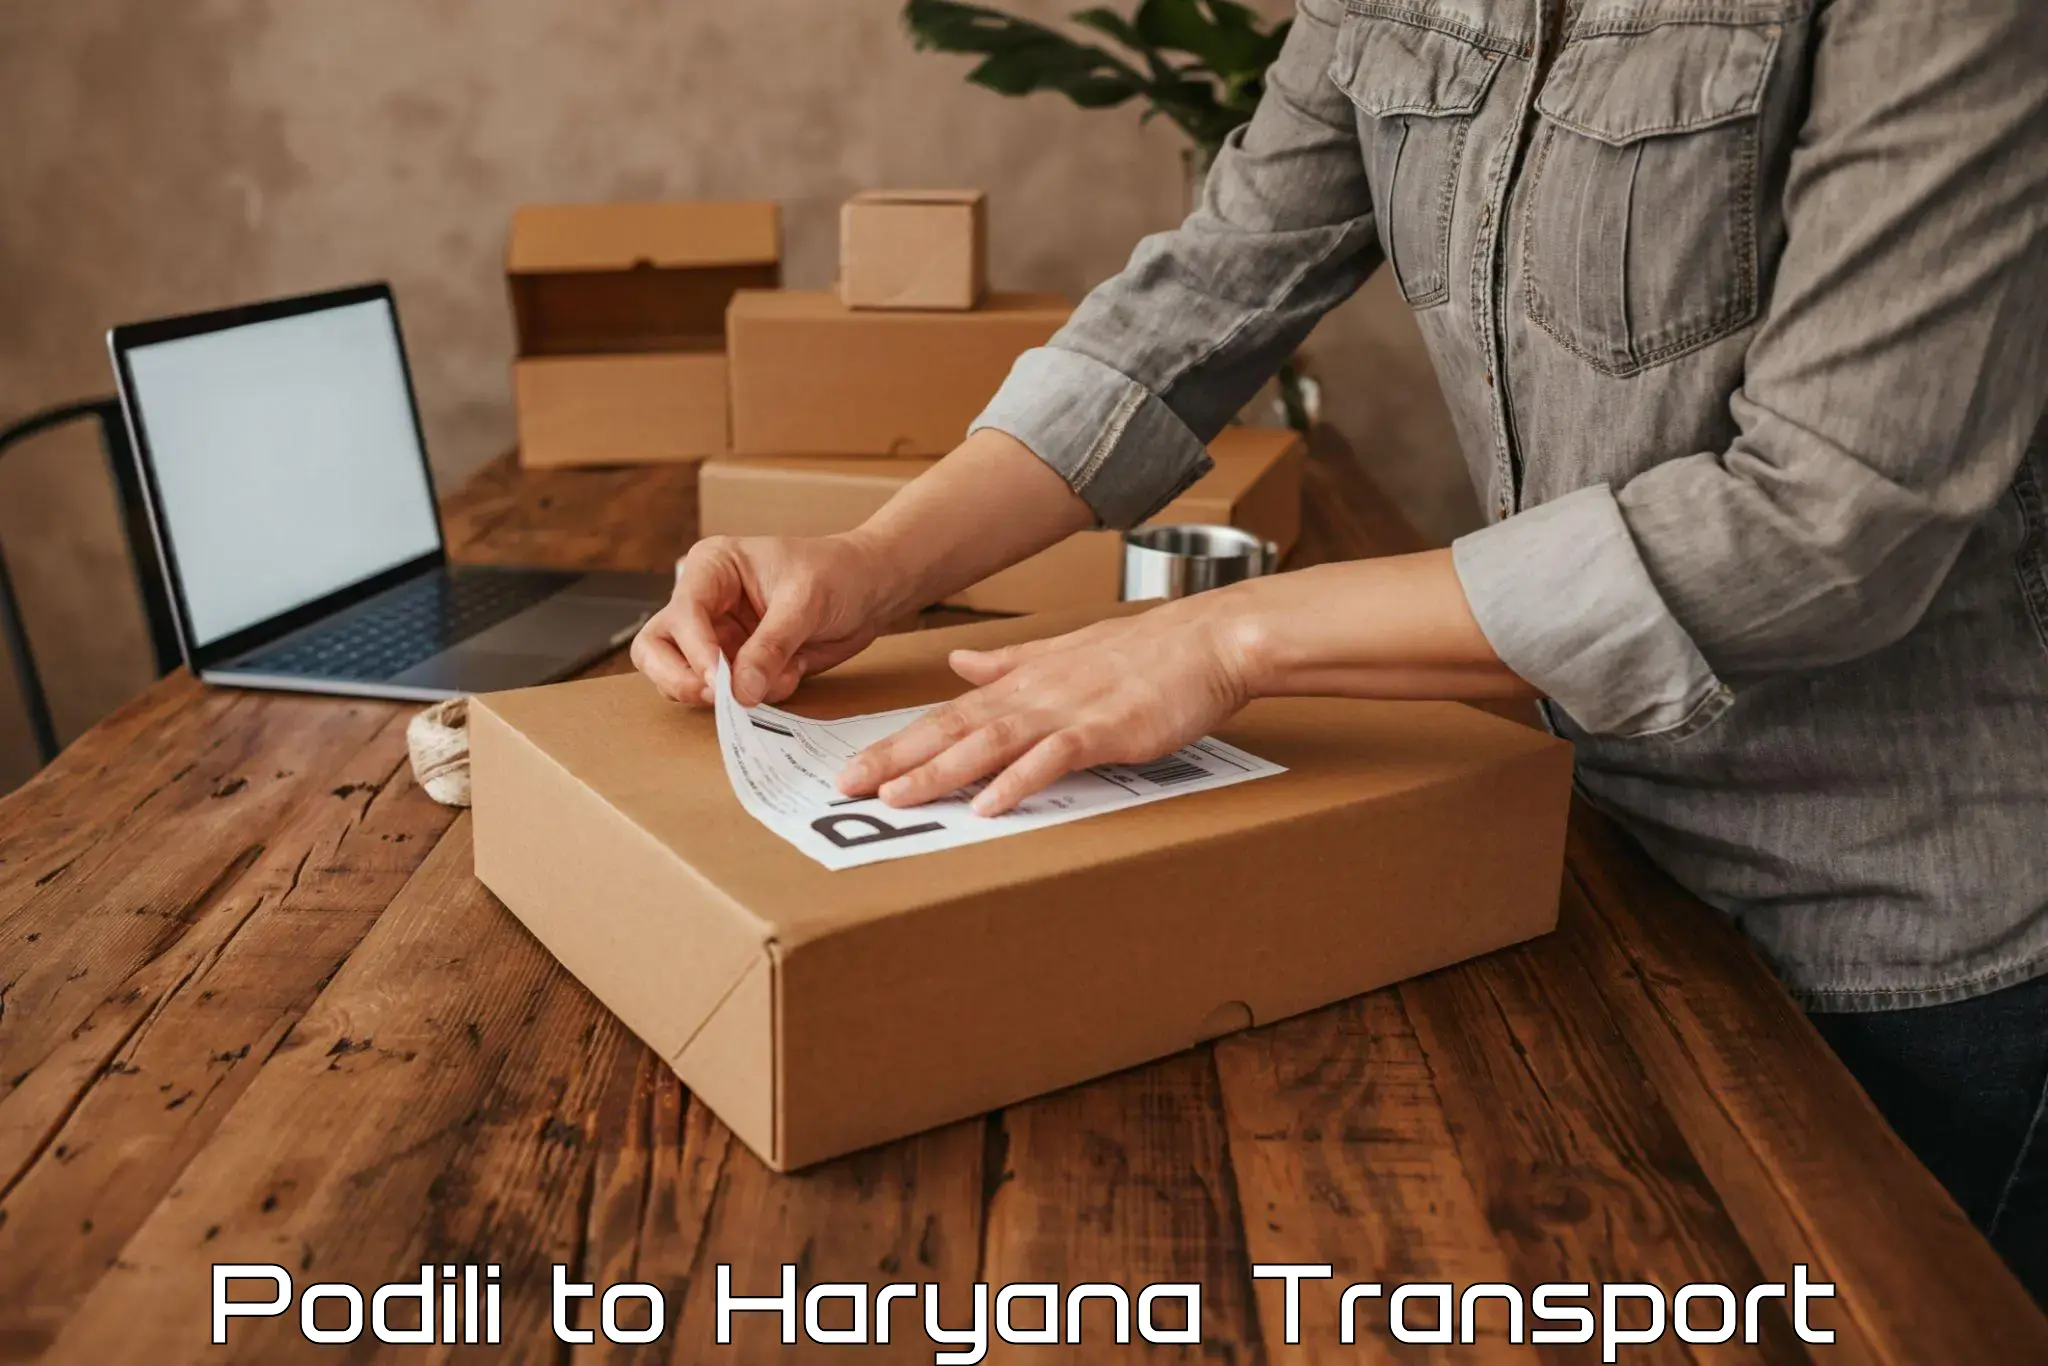 Commercial transport service in Podili to Chaudhary Charan Singh Haryana Agricultural University Hisar